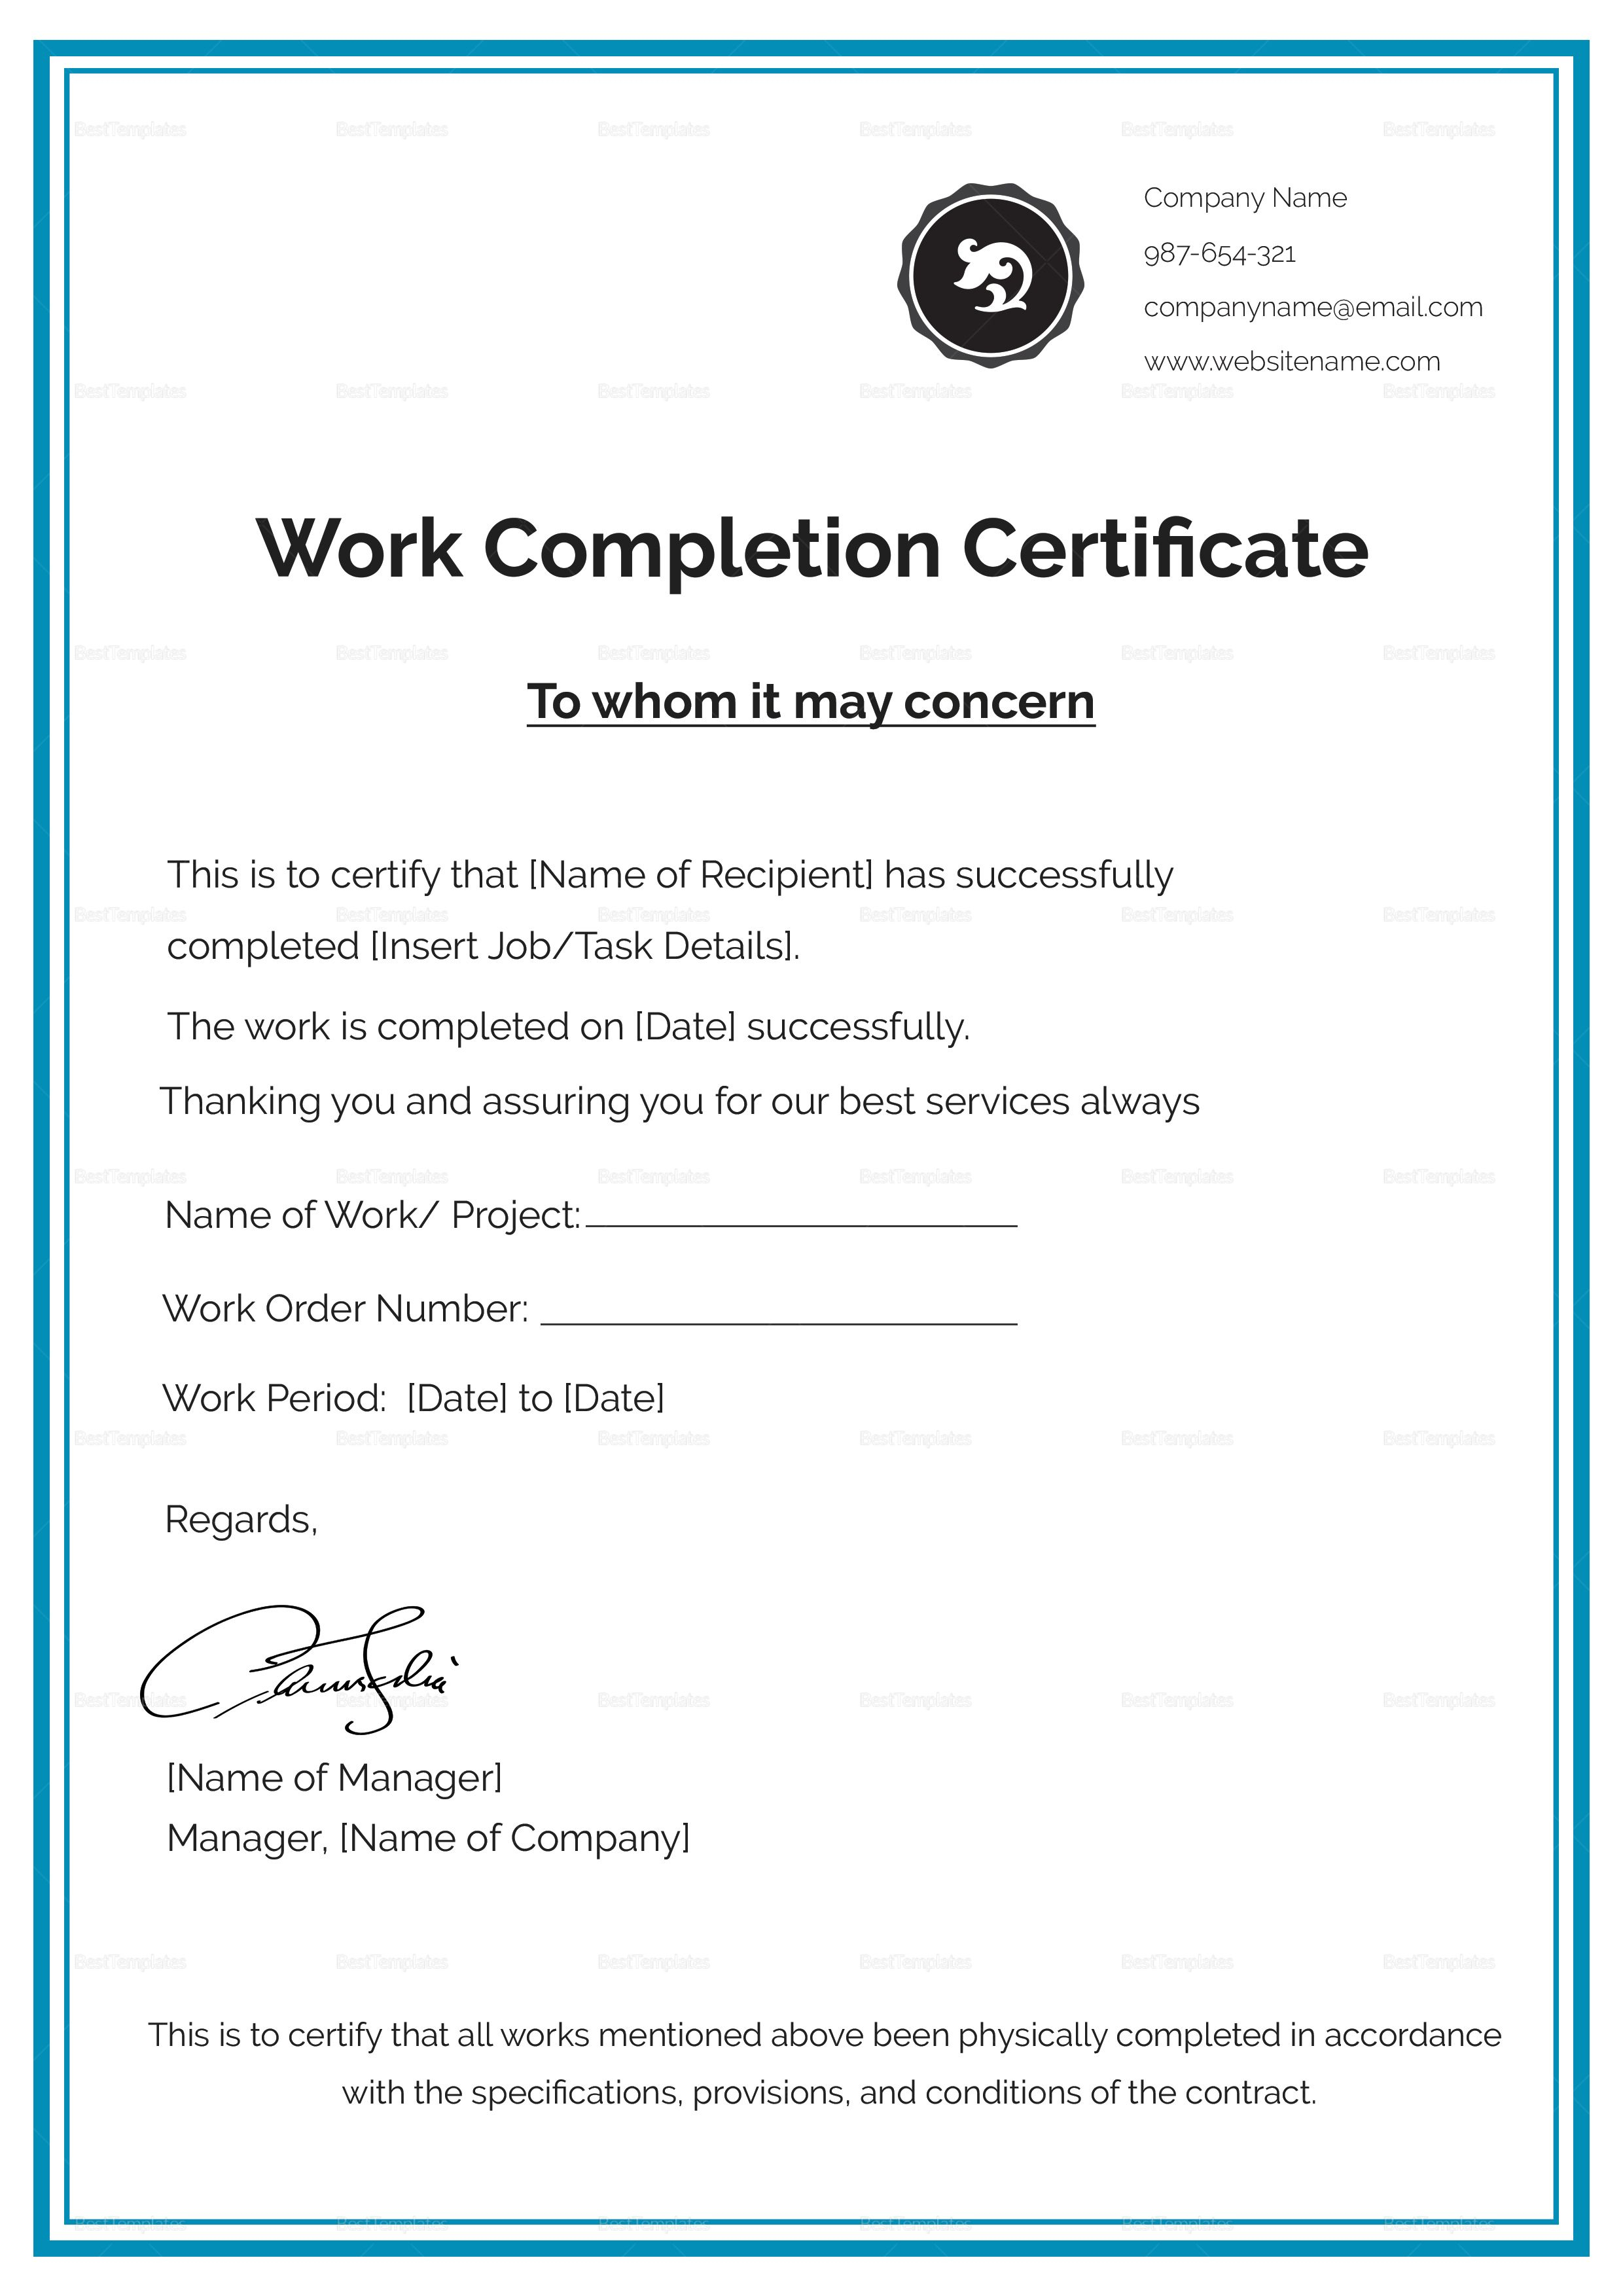 Work Completion Certificate Template | Angela Sworn Throughout Construction Certificate Of Completion Template